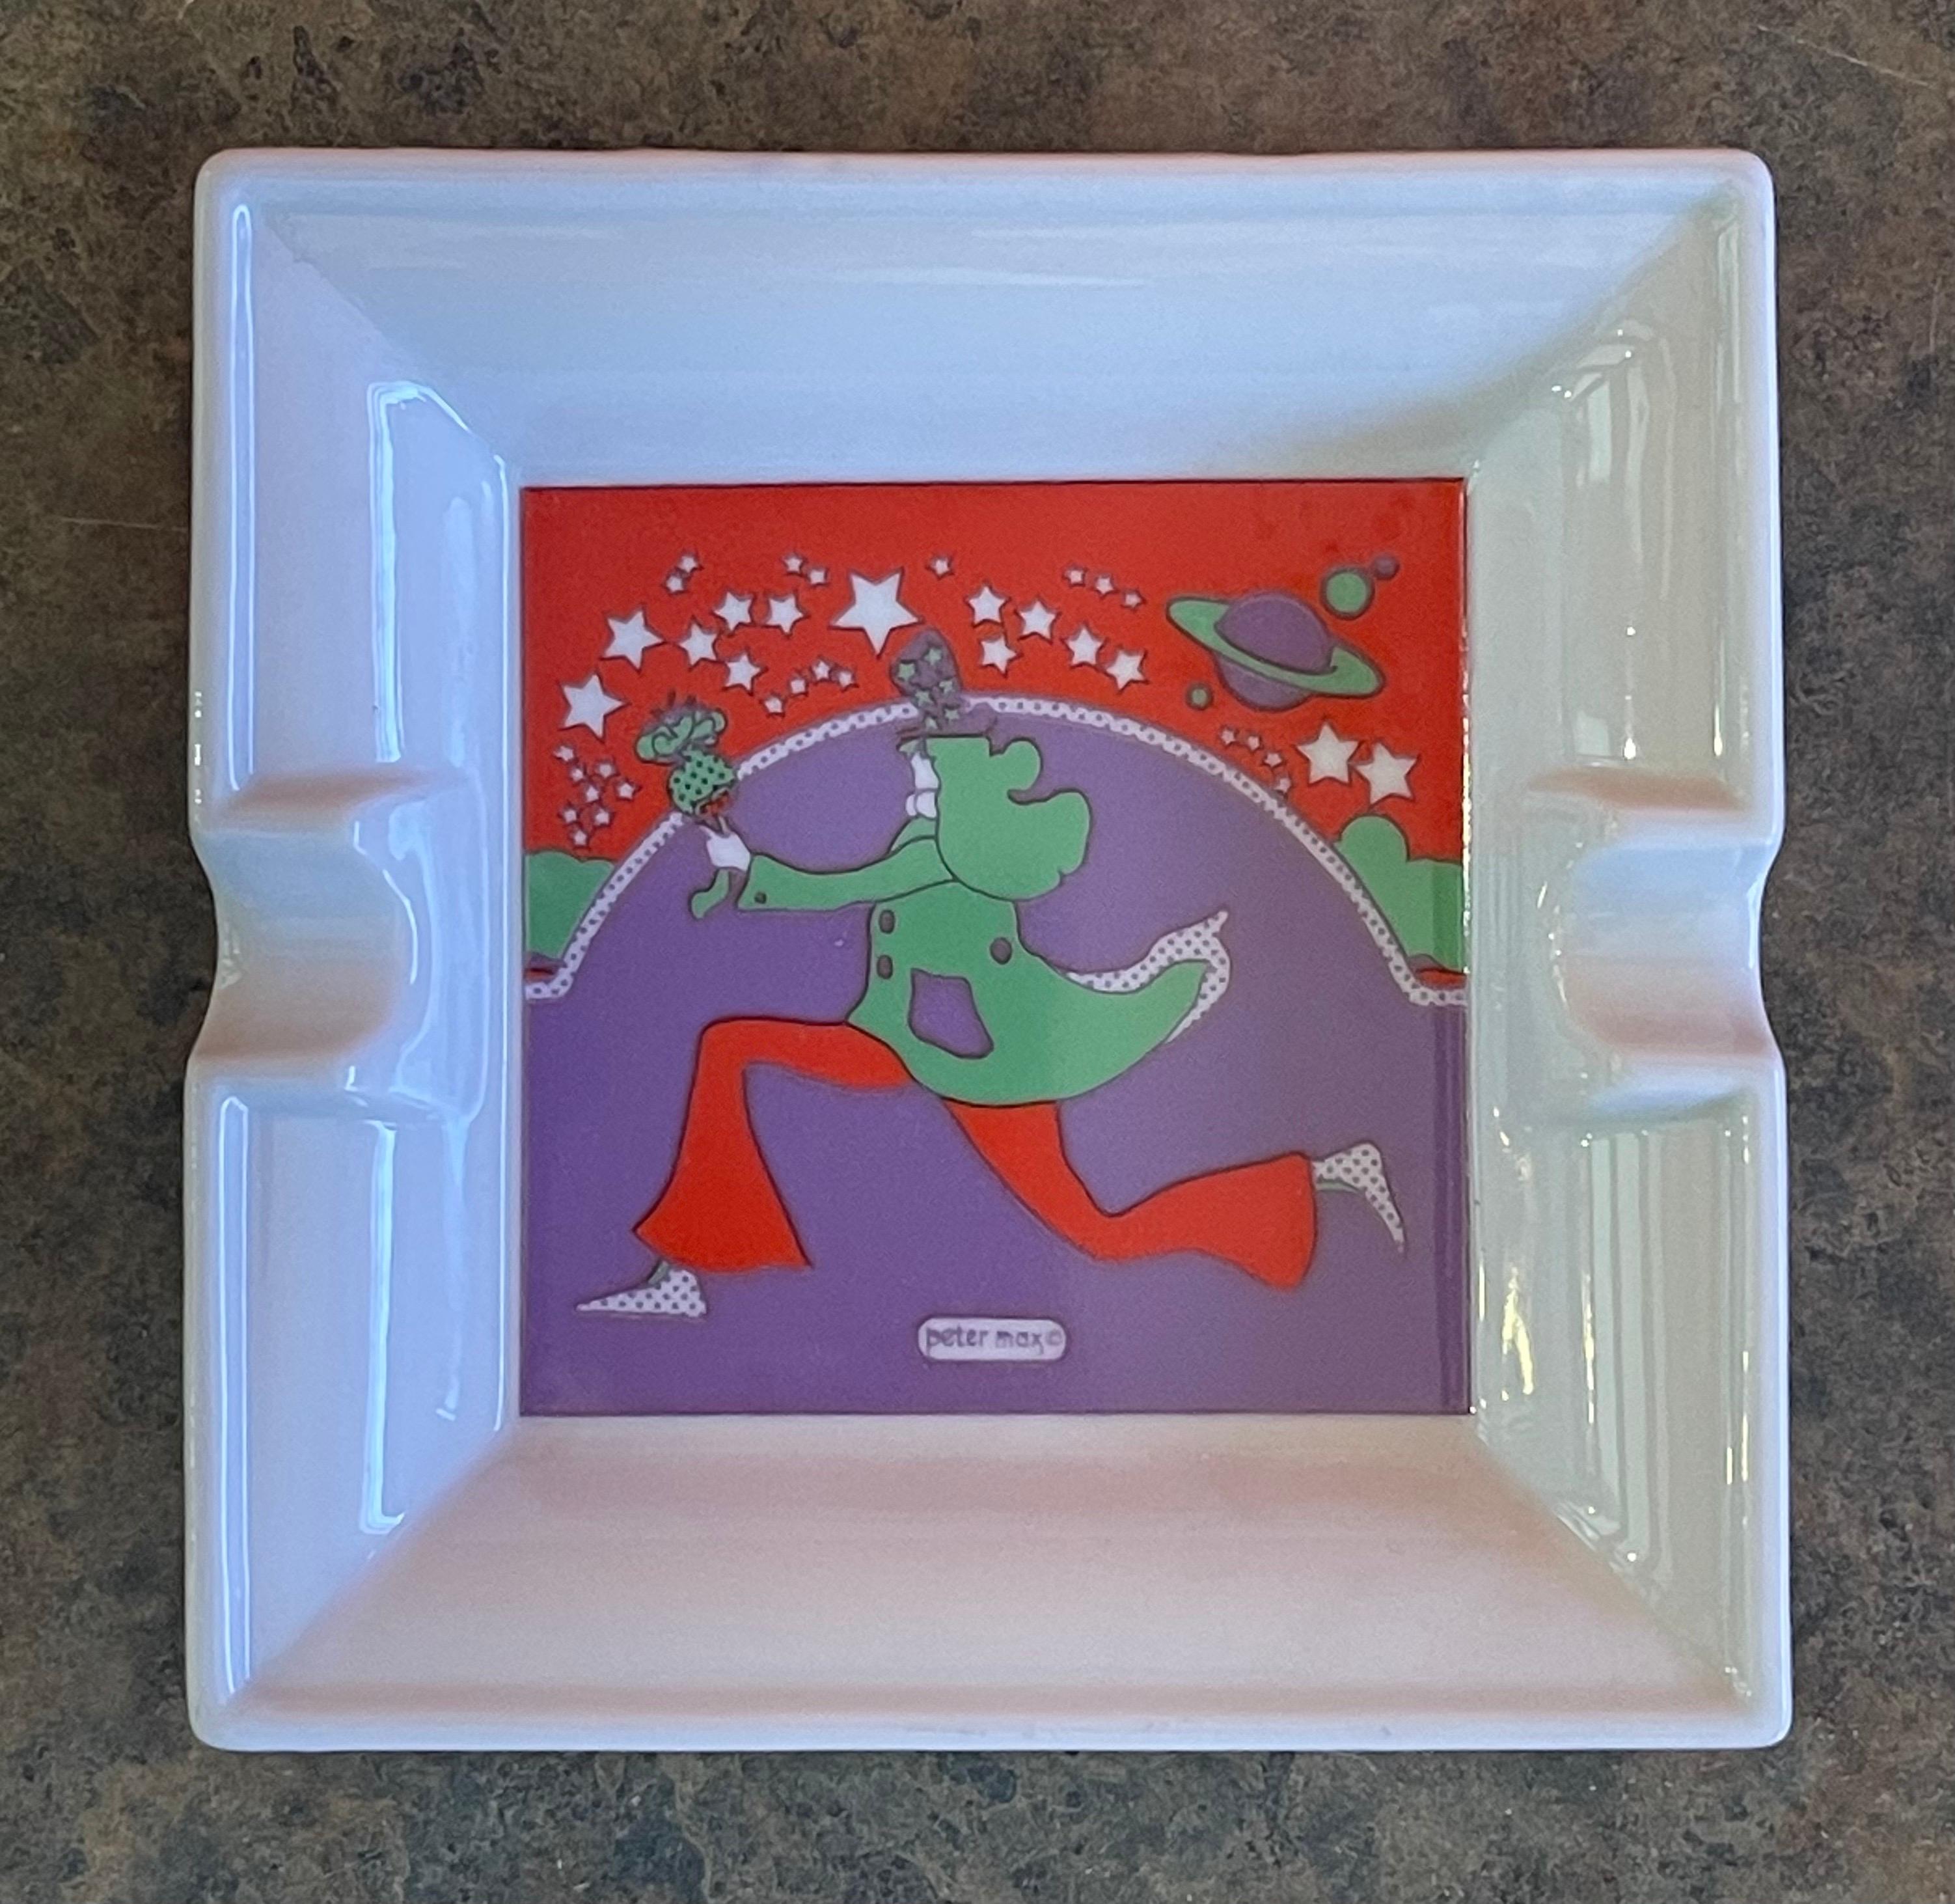 Peter Max Pop Art Ceramic Ashtray by Iroquois In Good Condition For Sale In San Diego, CA